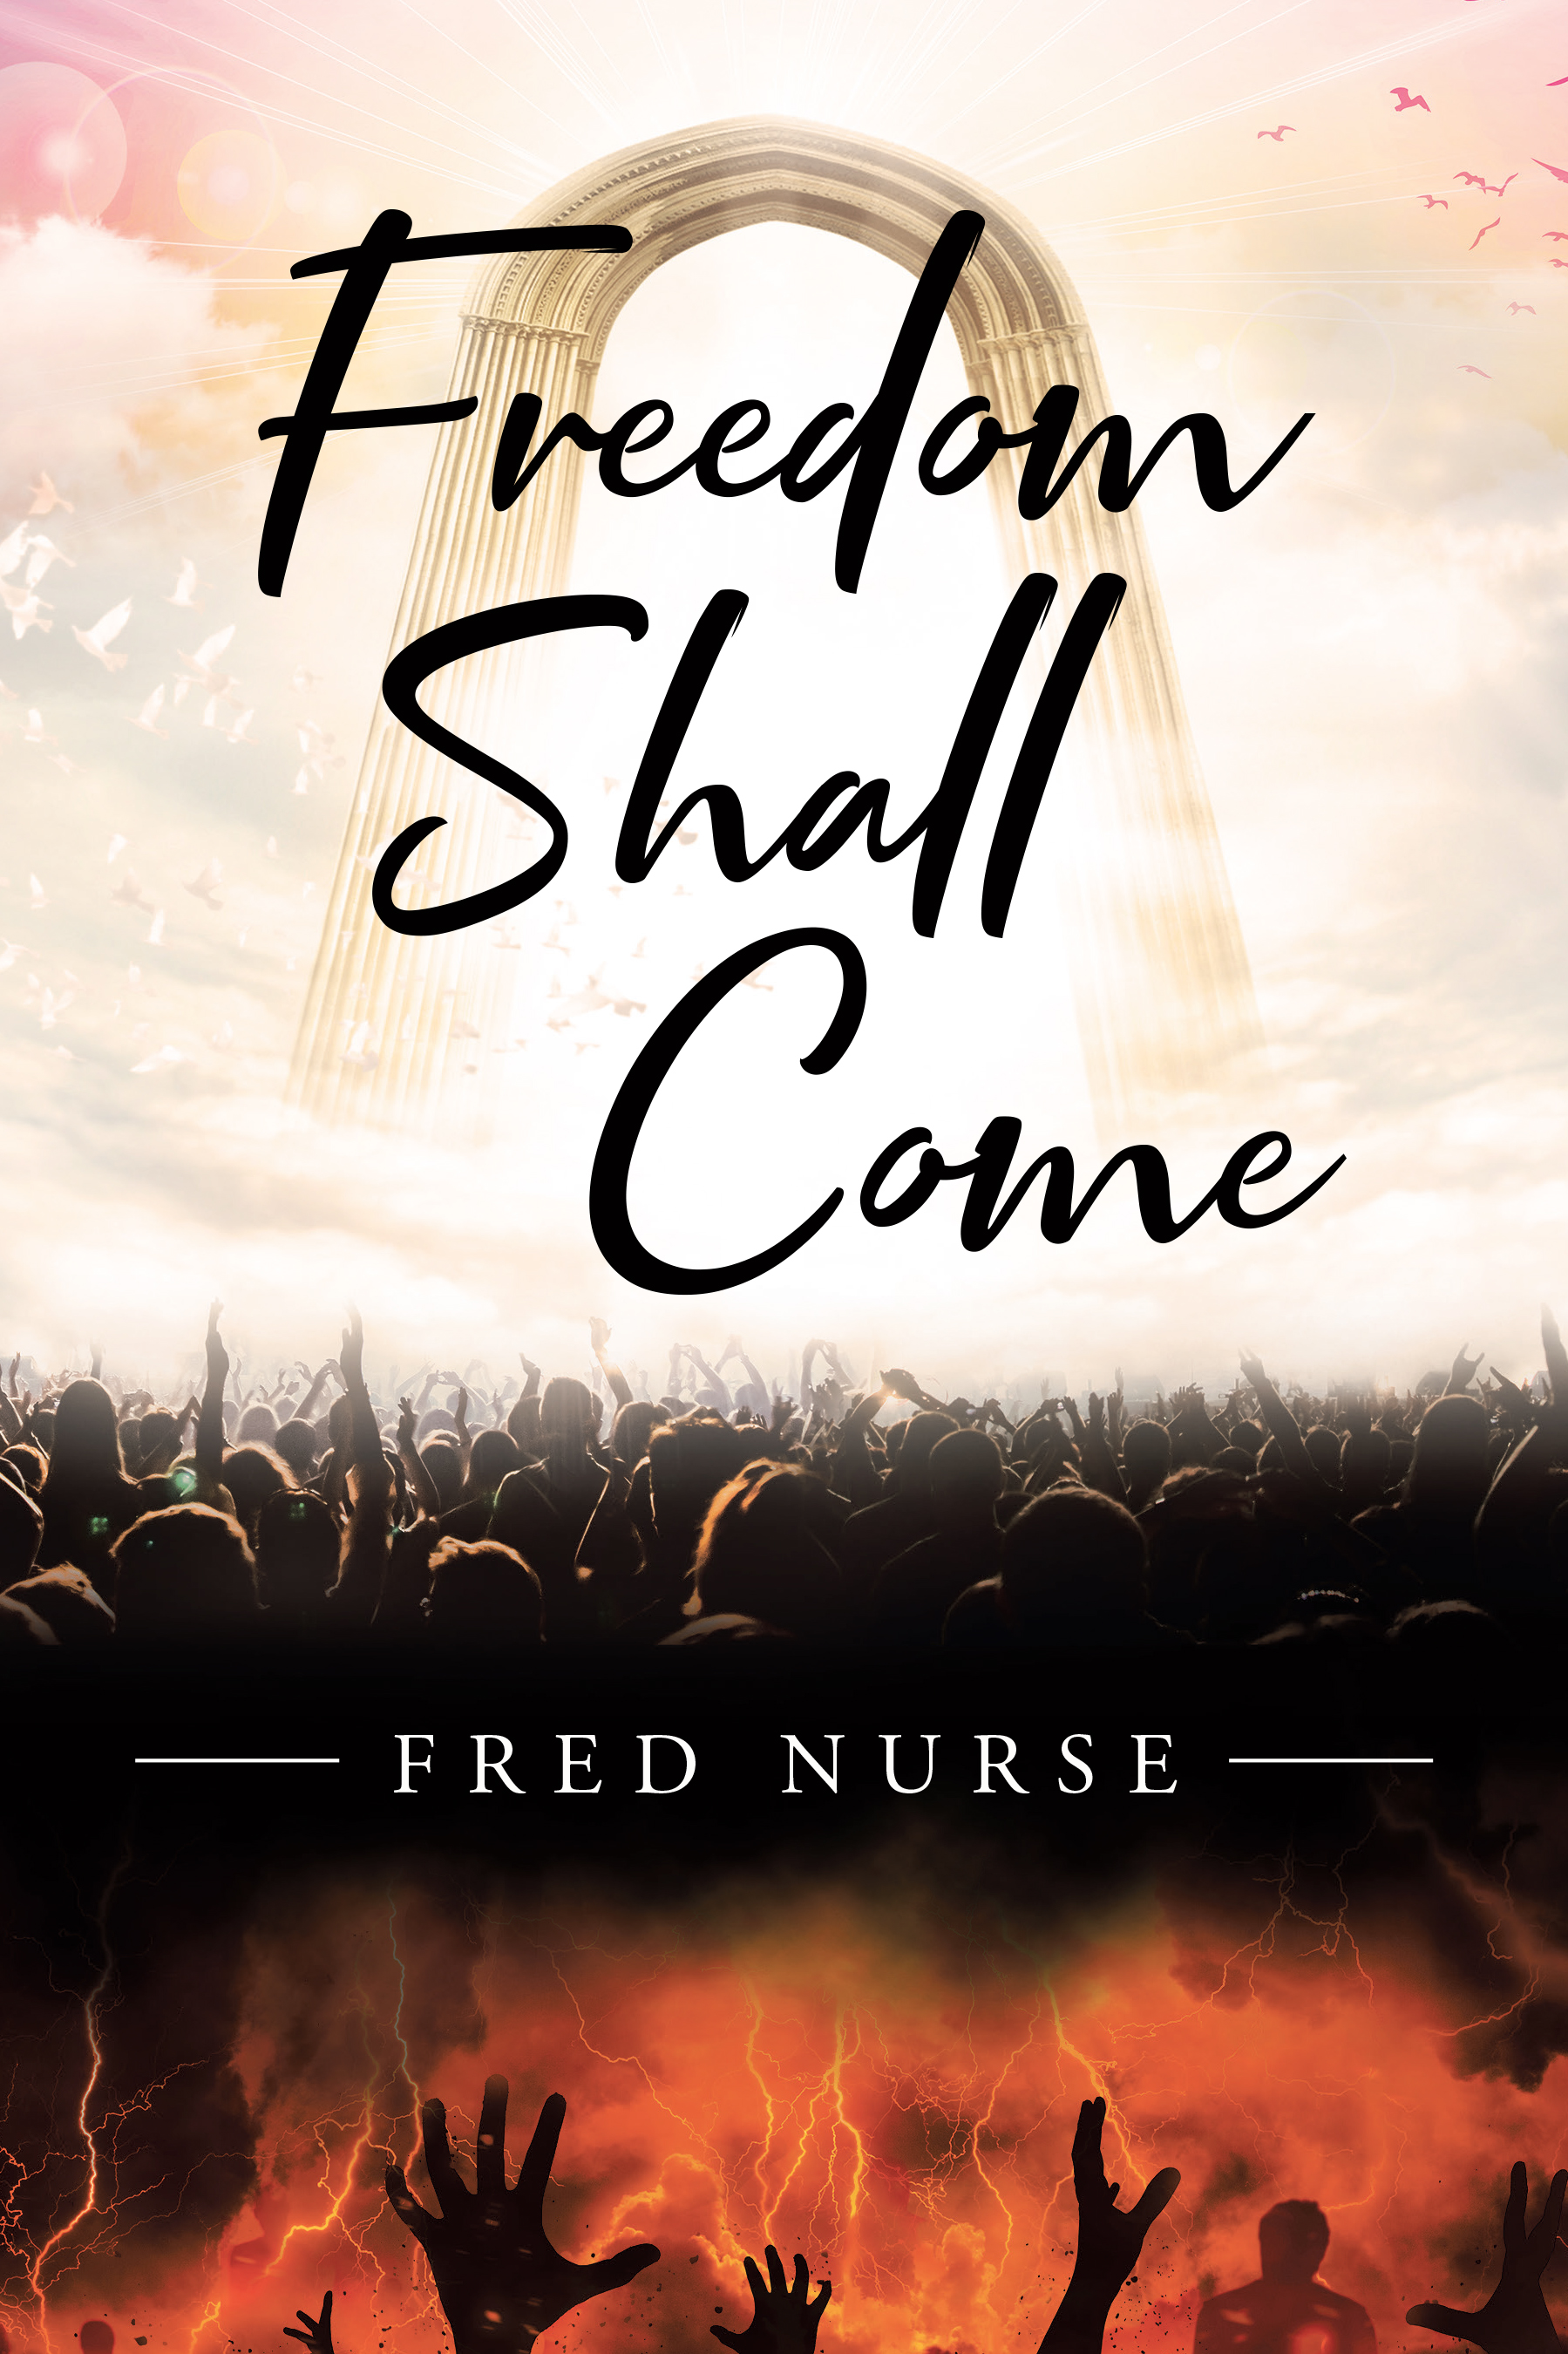 Author Fred Nurse’s New Book, "Freedom Shall Come," is a Fictional Story of Love, Faith, and Conviction Set Thirty Years in the Future